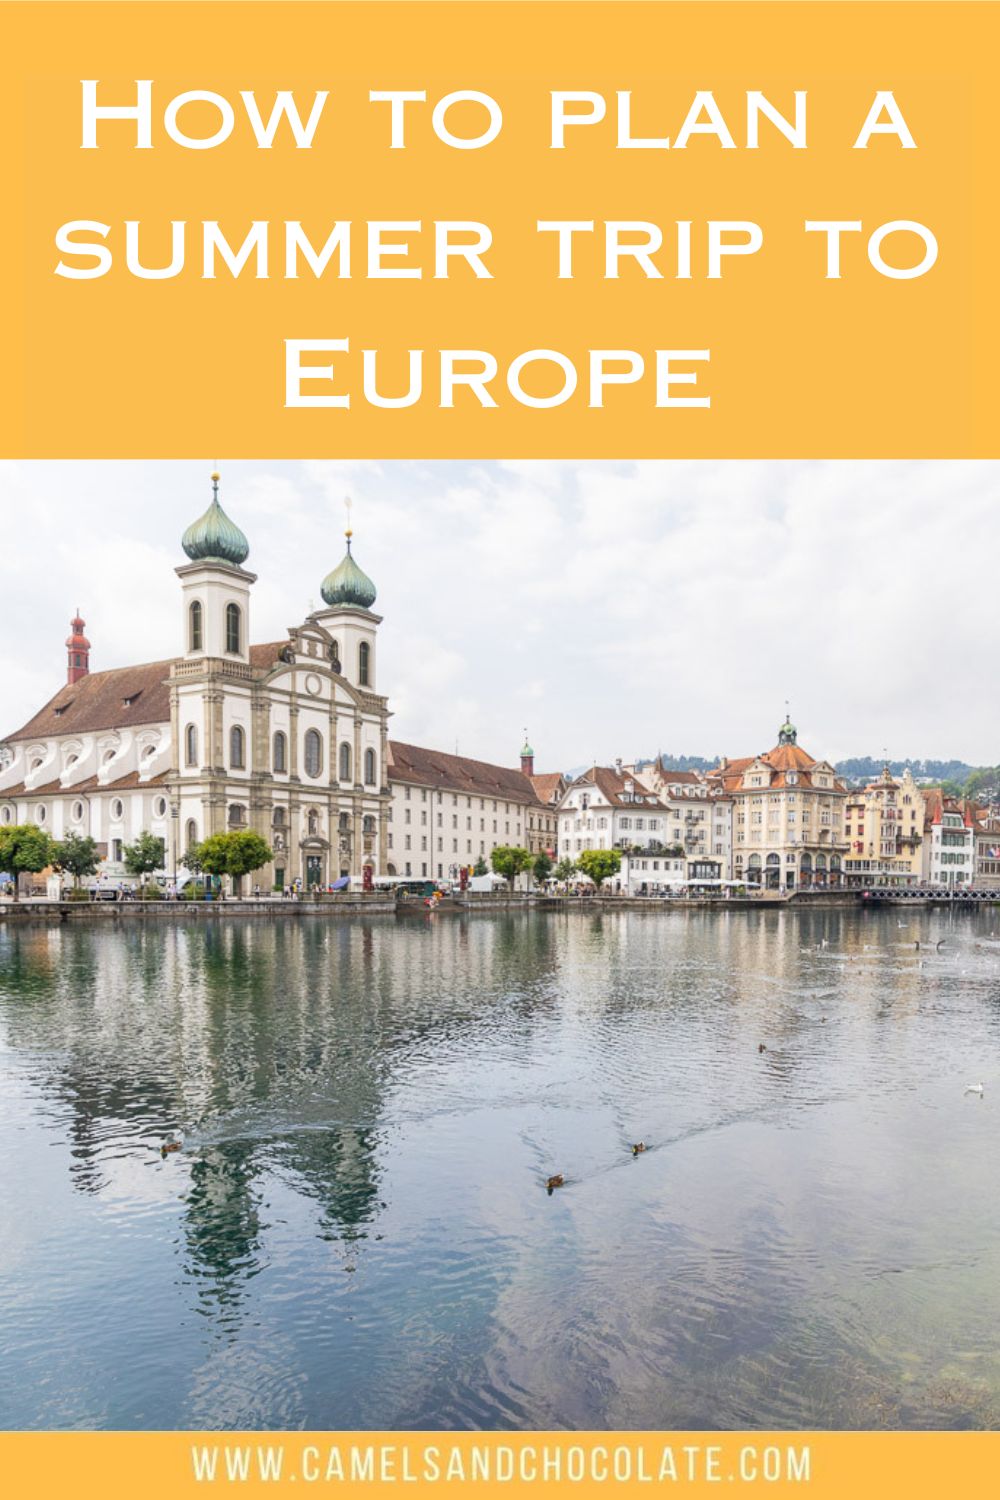 How to Plan a Summer Trip in Europe